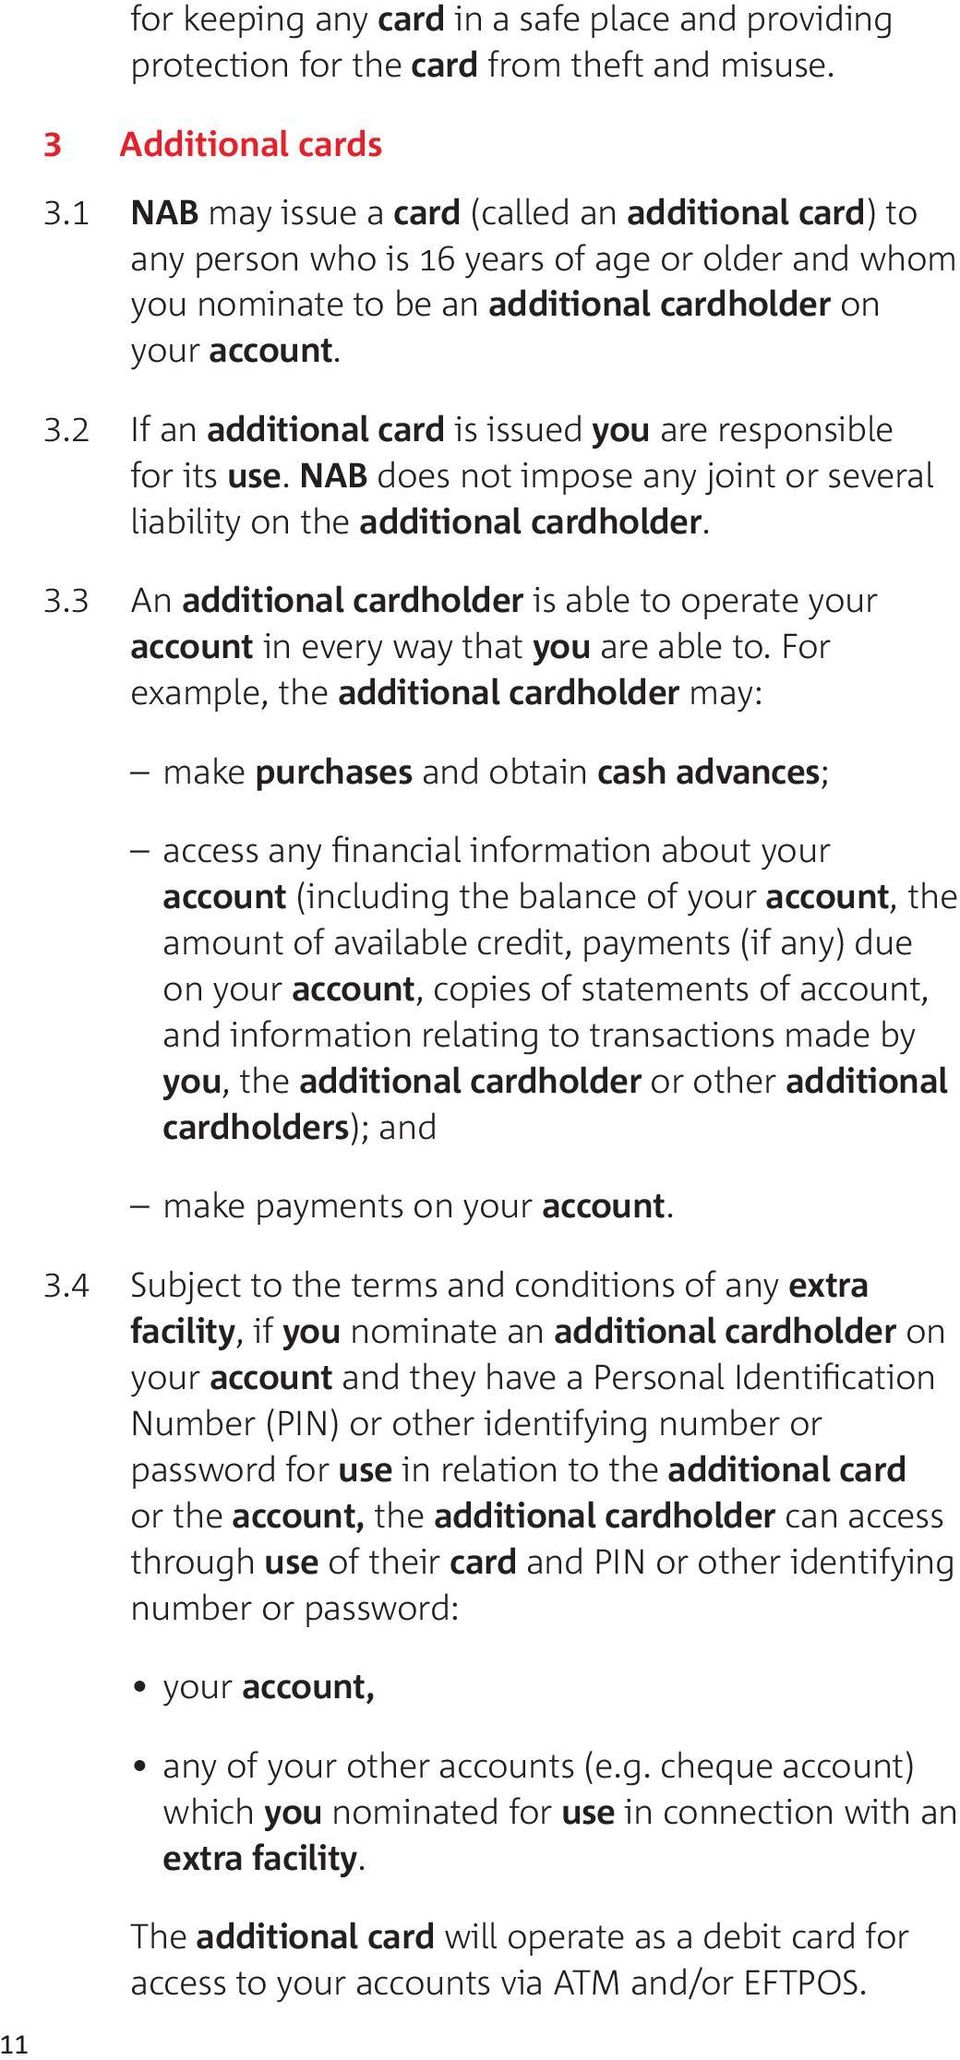 2 If an additional card is issued you are responsible for its use. NAB does not impose any joint or several liability on the additional cardholder. 3.